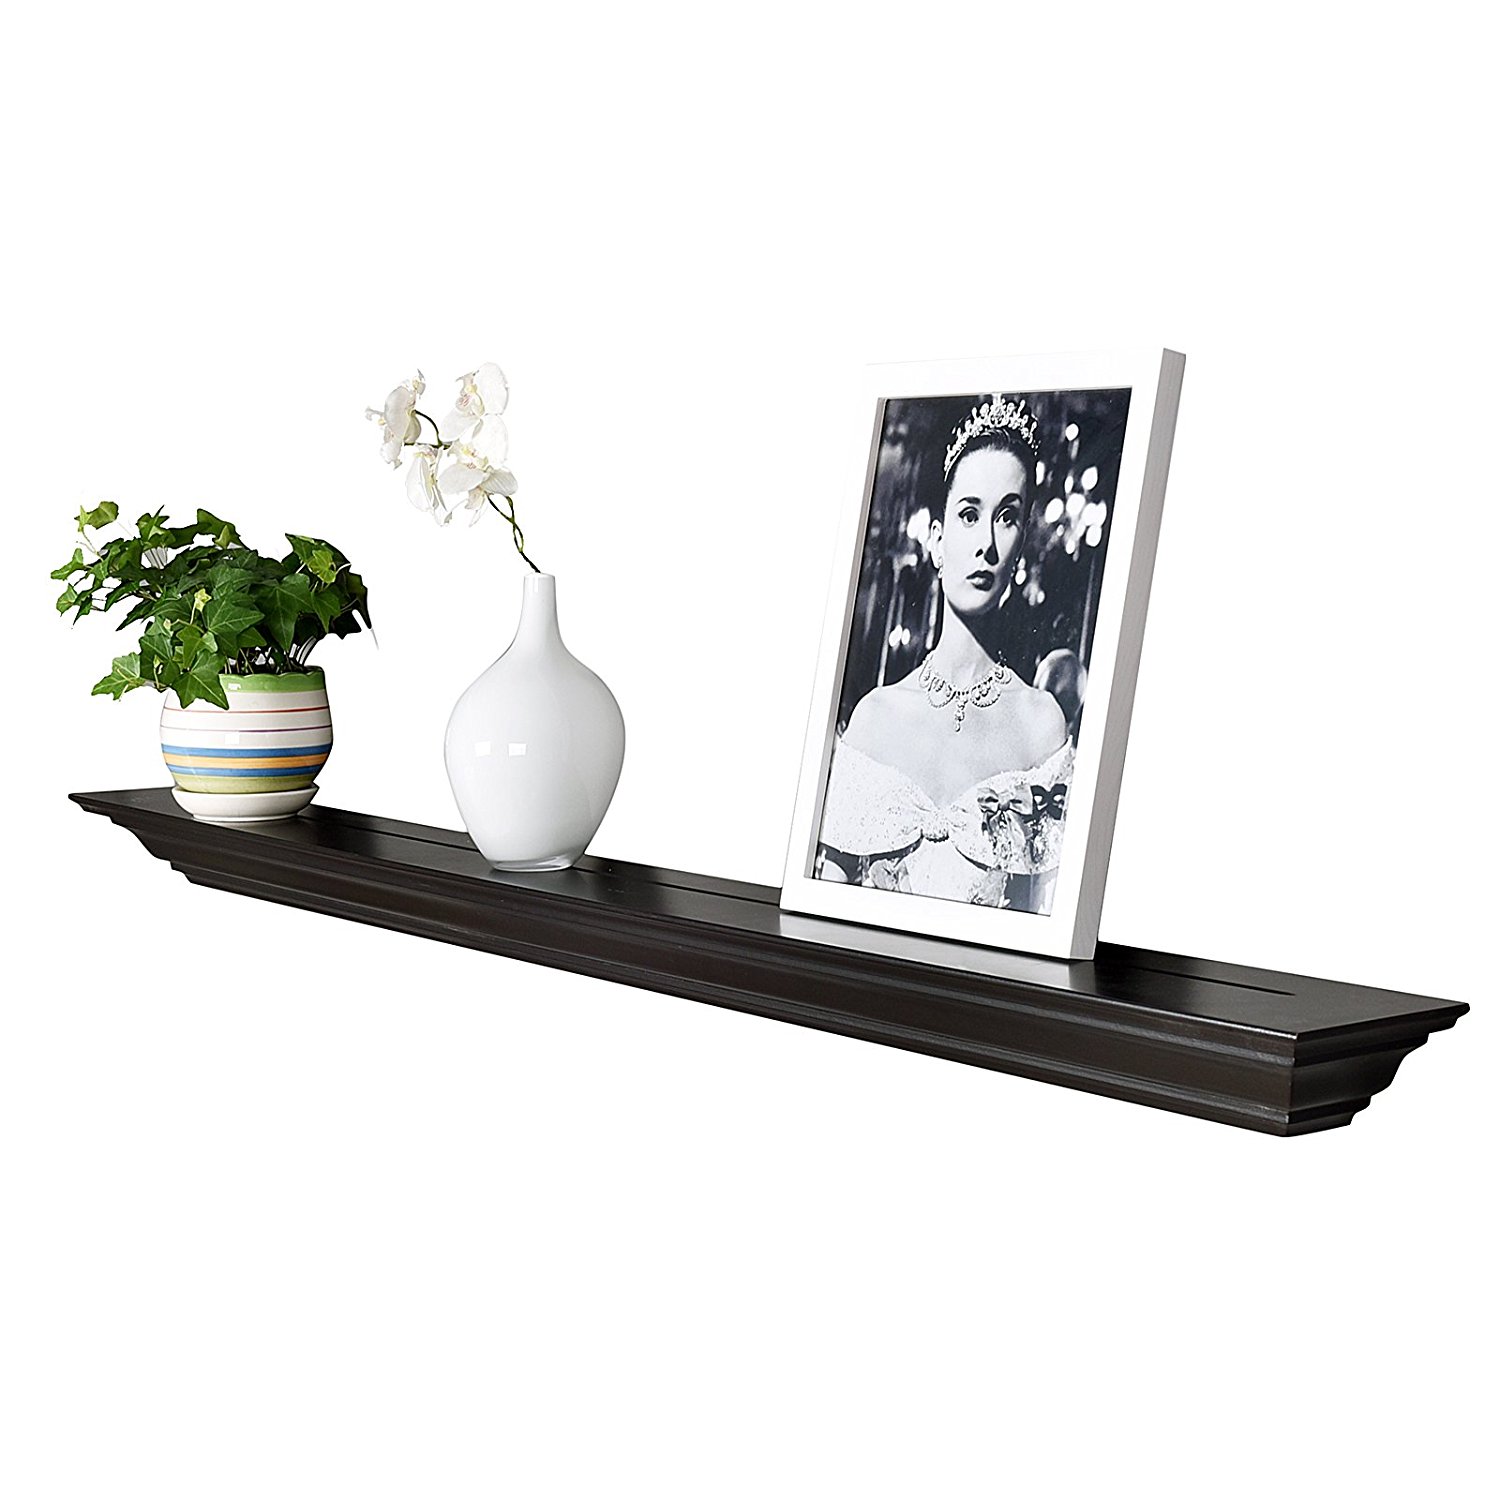 WELLAND 60" Espresso Fireplace Mantel Shelf with Crown Molding Lines(Picture Ledge)